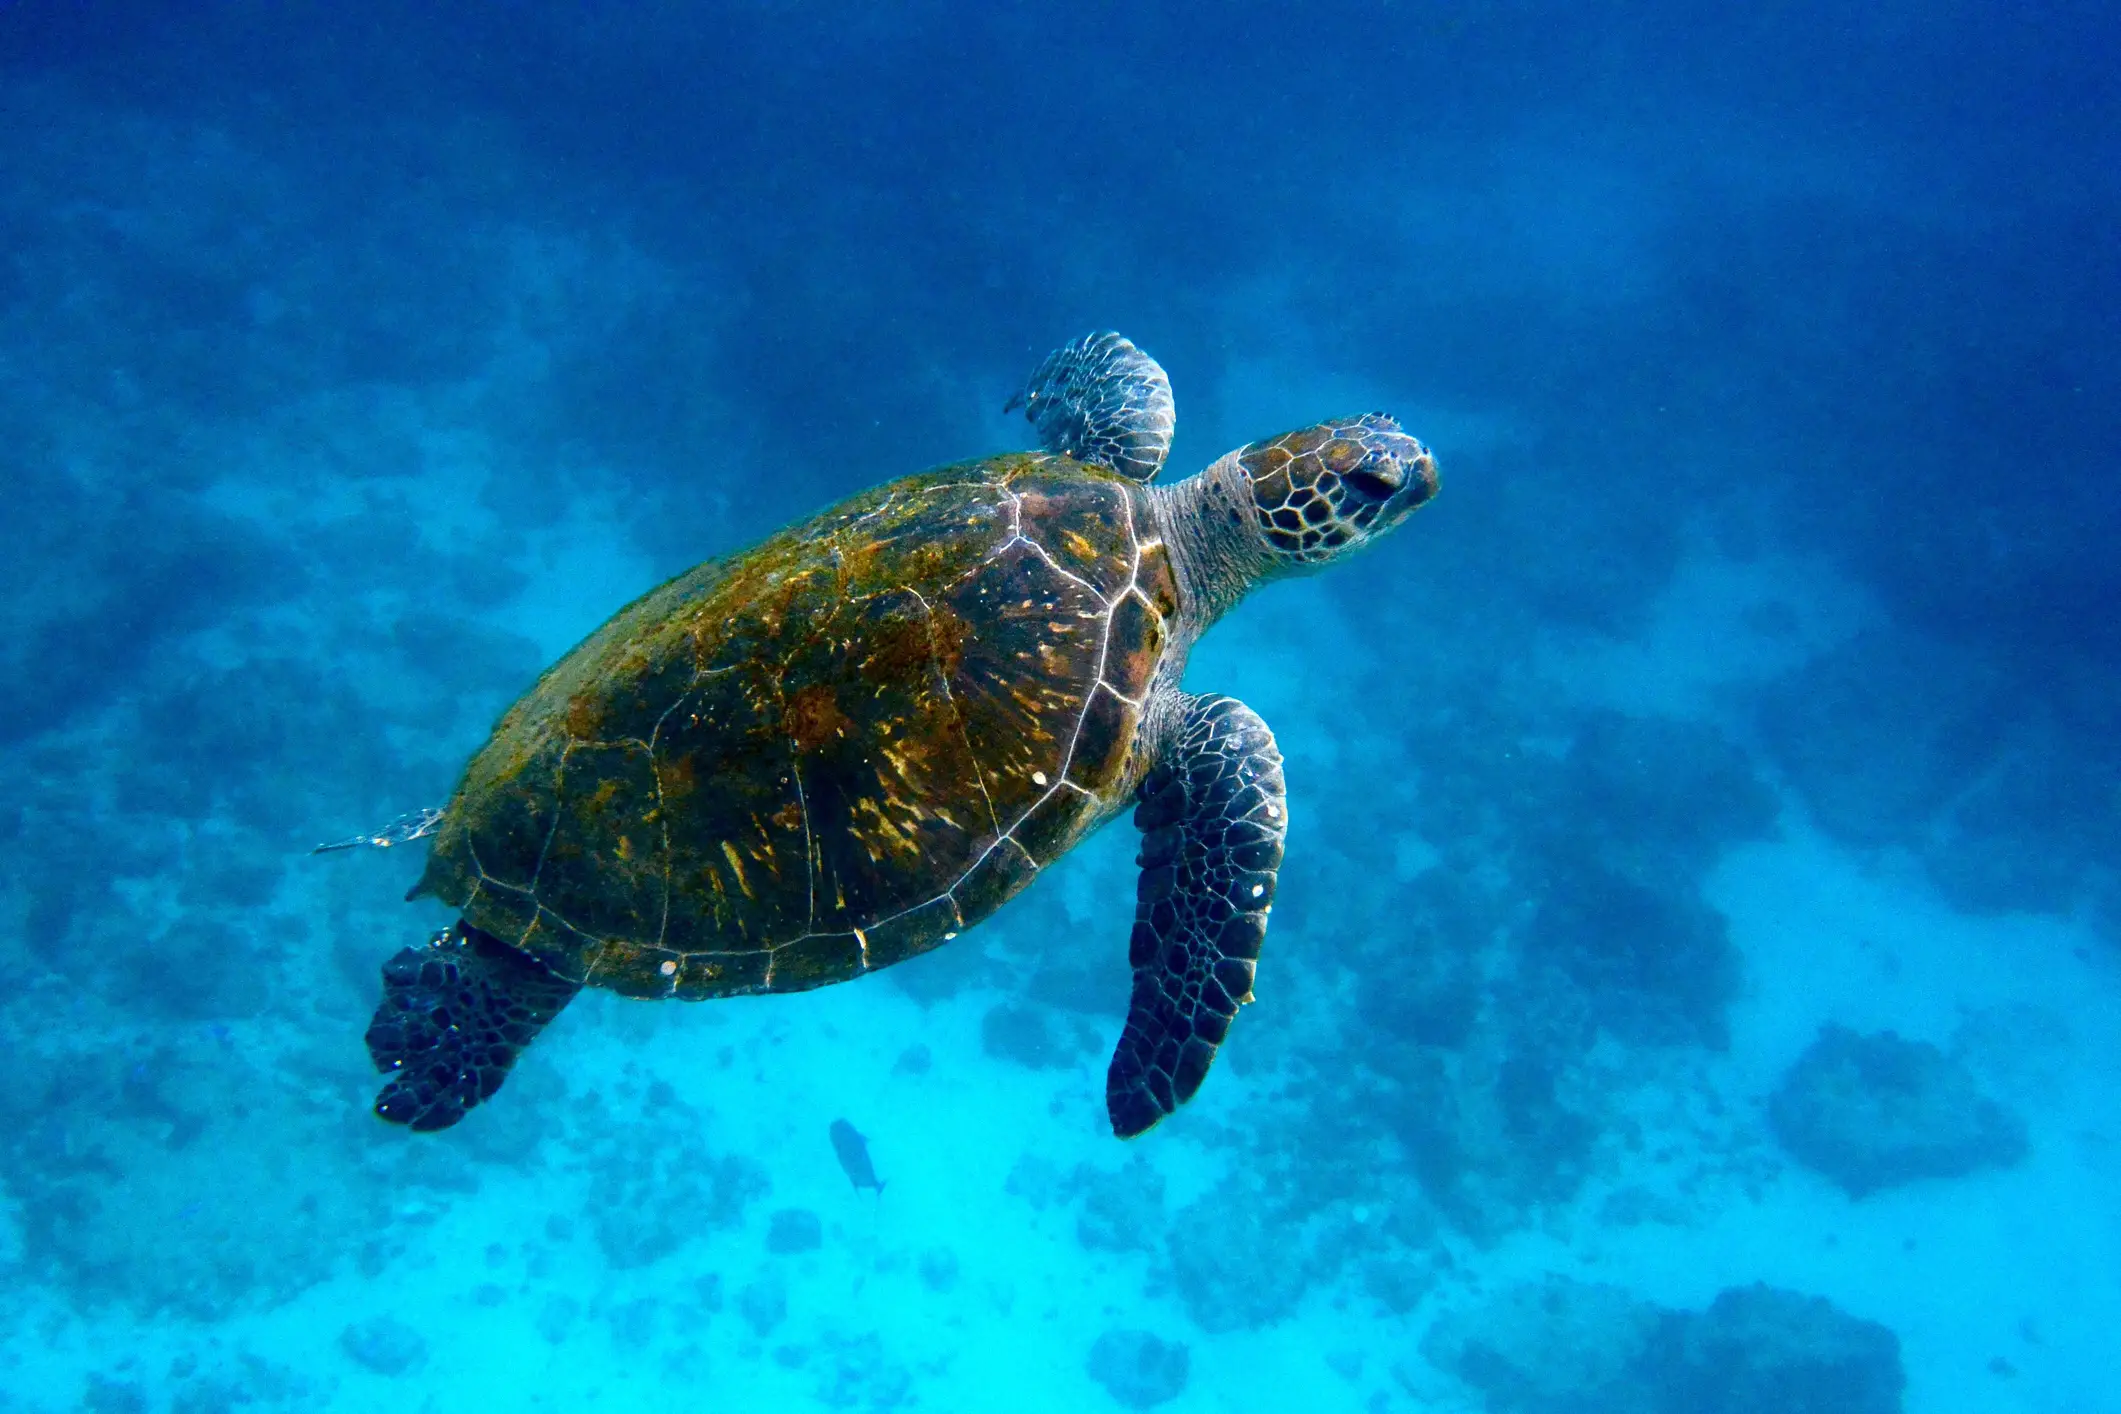 Ethical Travel: How to snorkel safely and sustainably with sea turtles